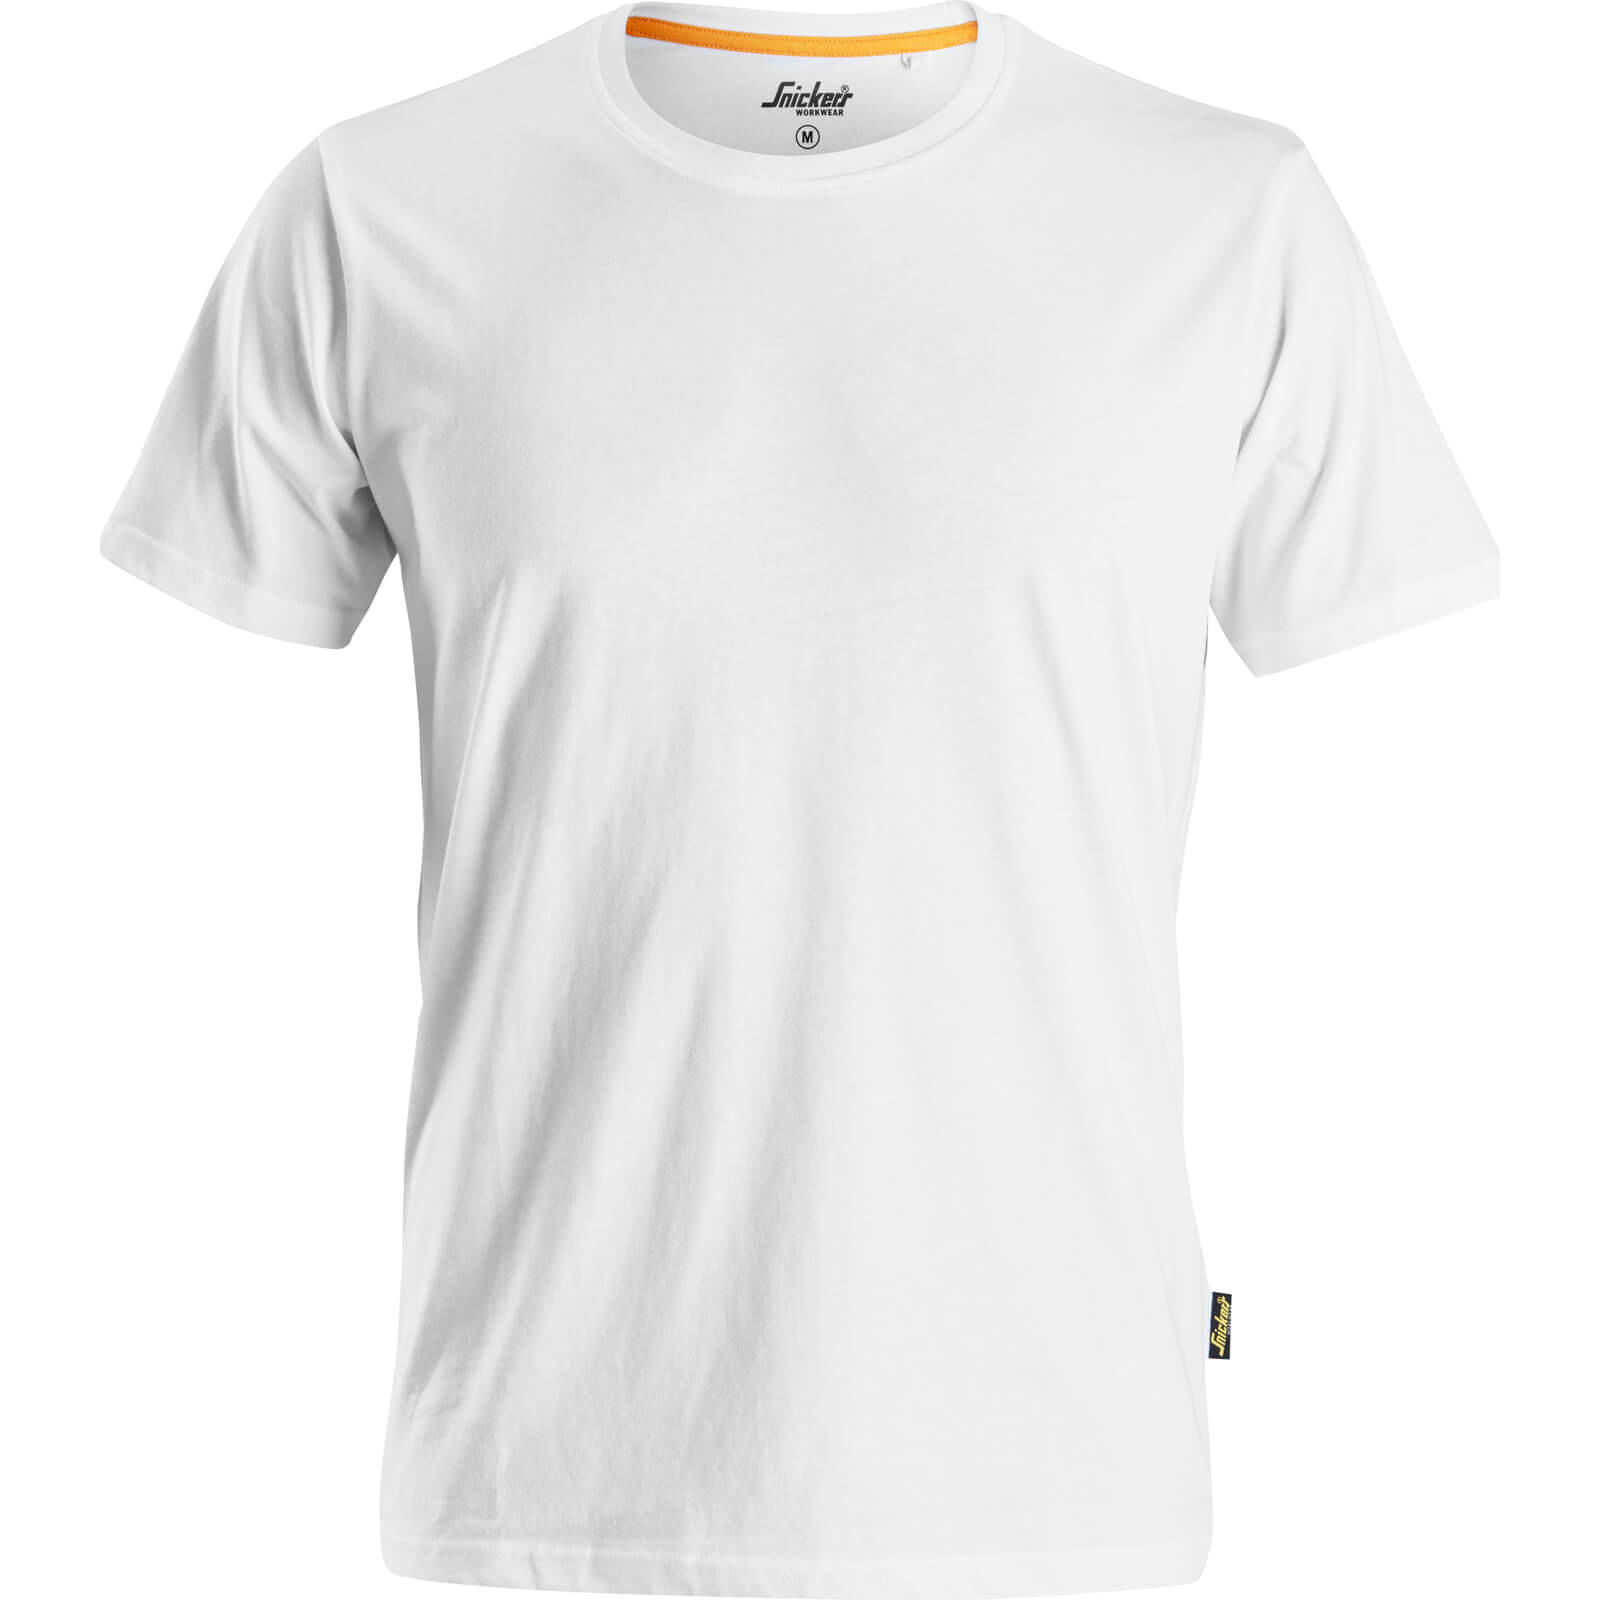 Image of Snickers Allround Work Organic Cotton T Shirt White XS